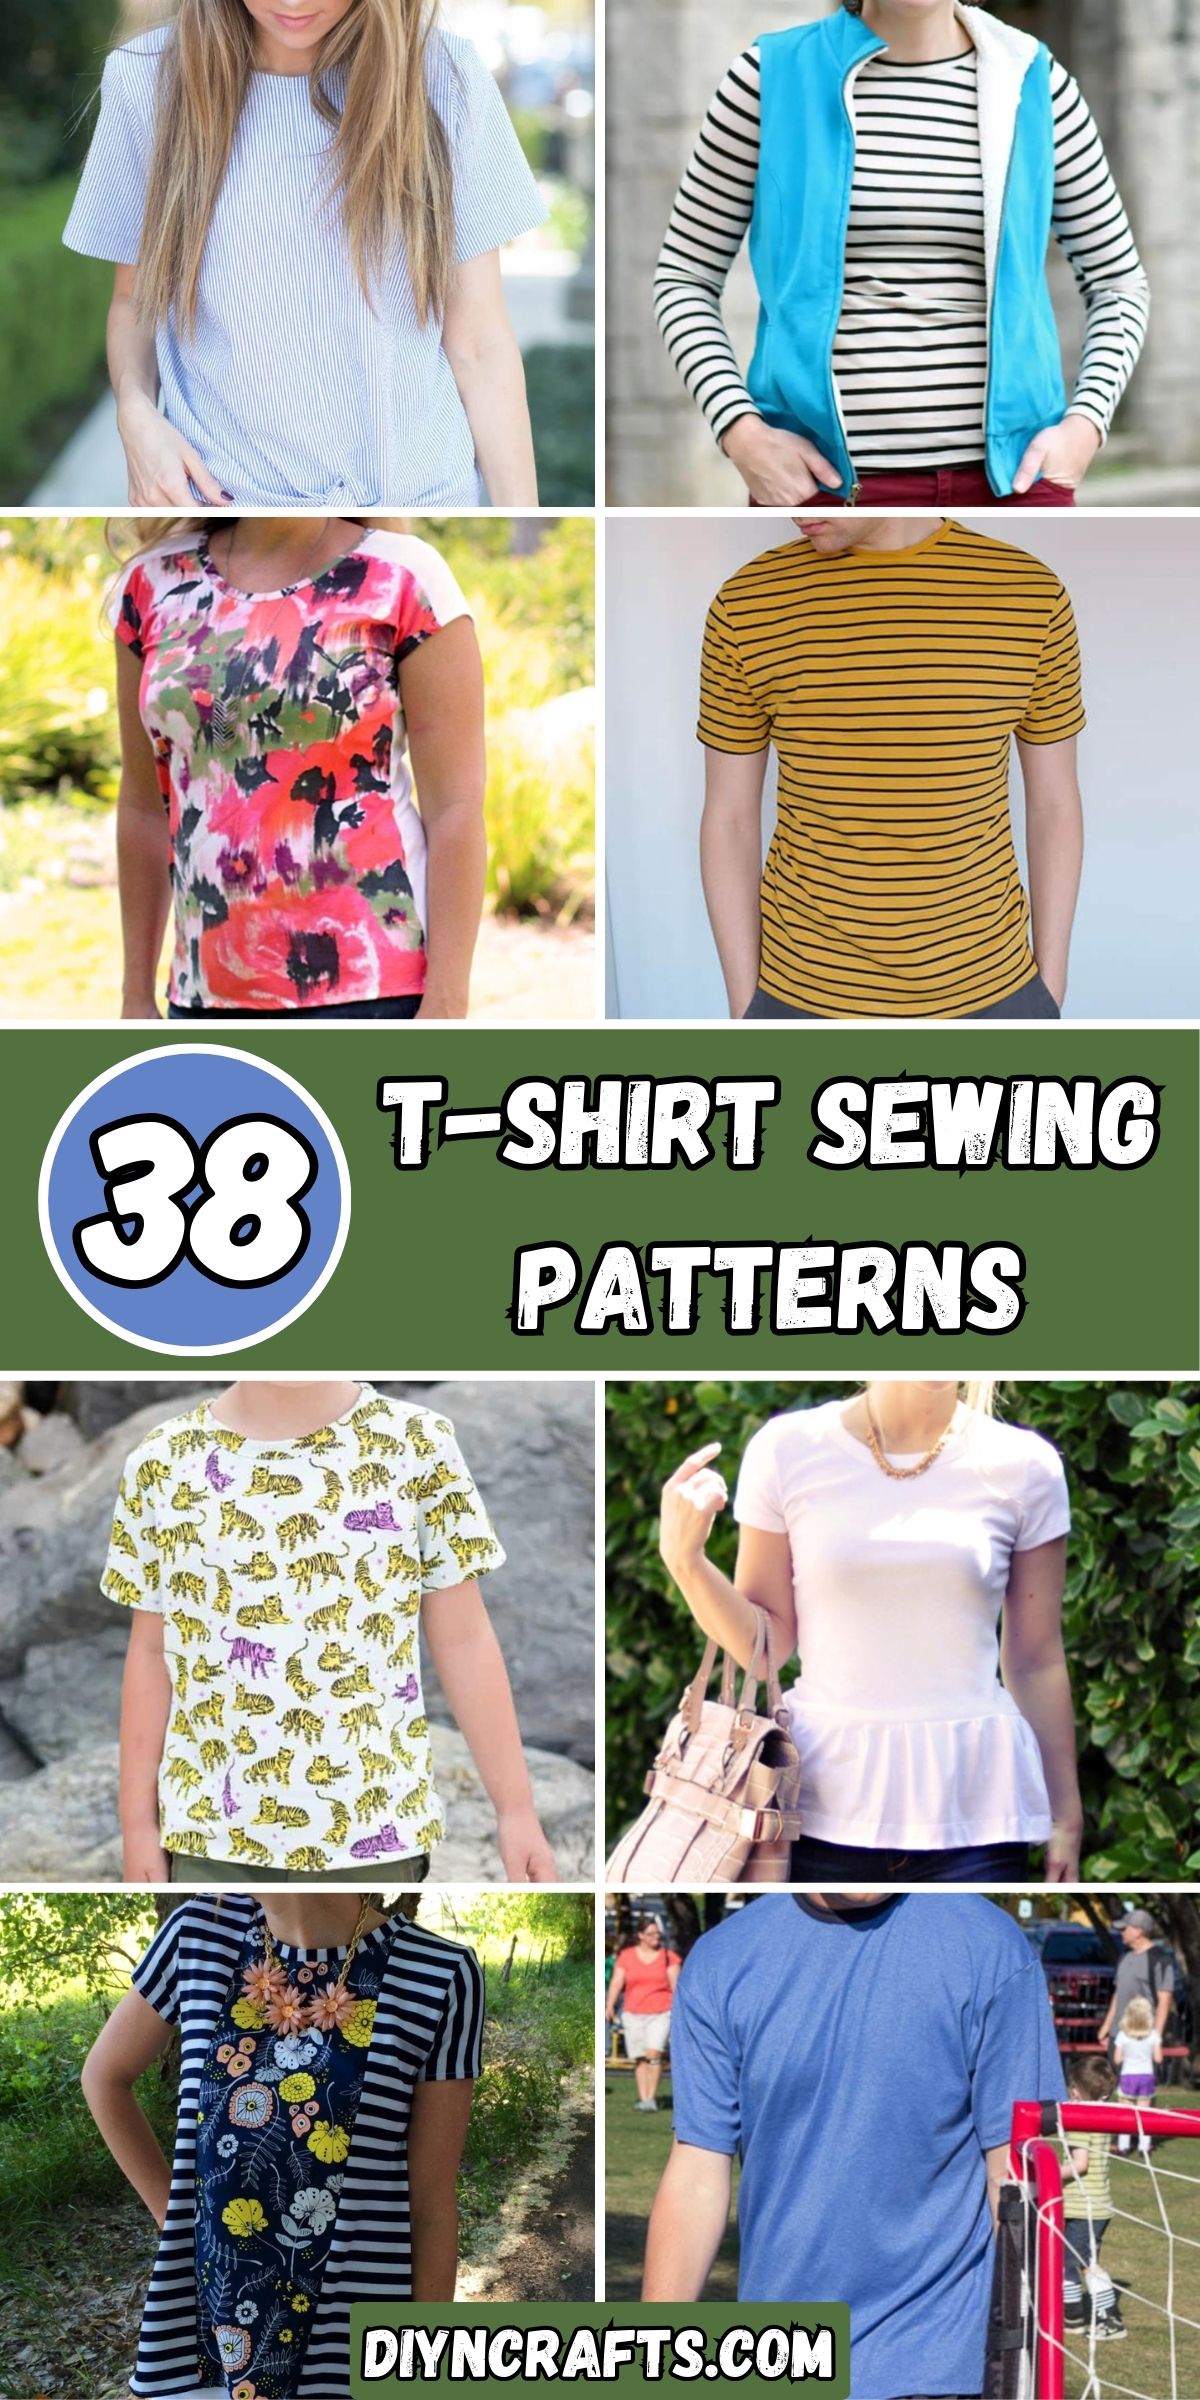 38 T-Shirt Sewing Patterns collage.